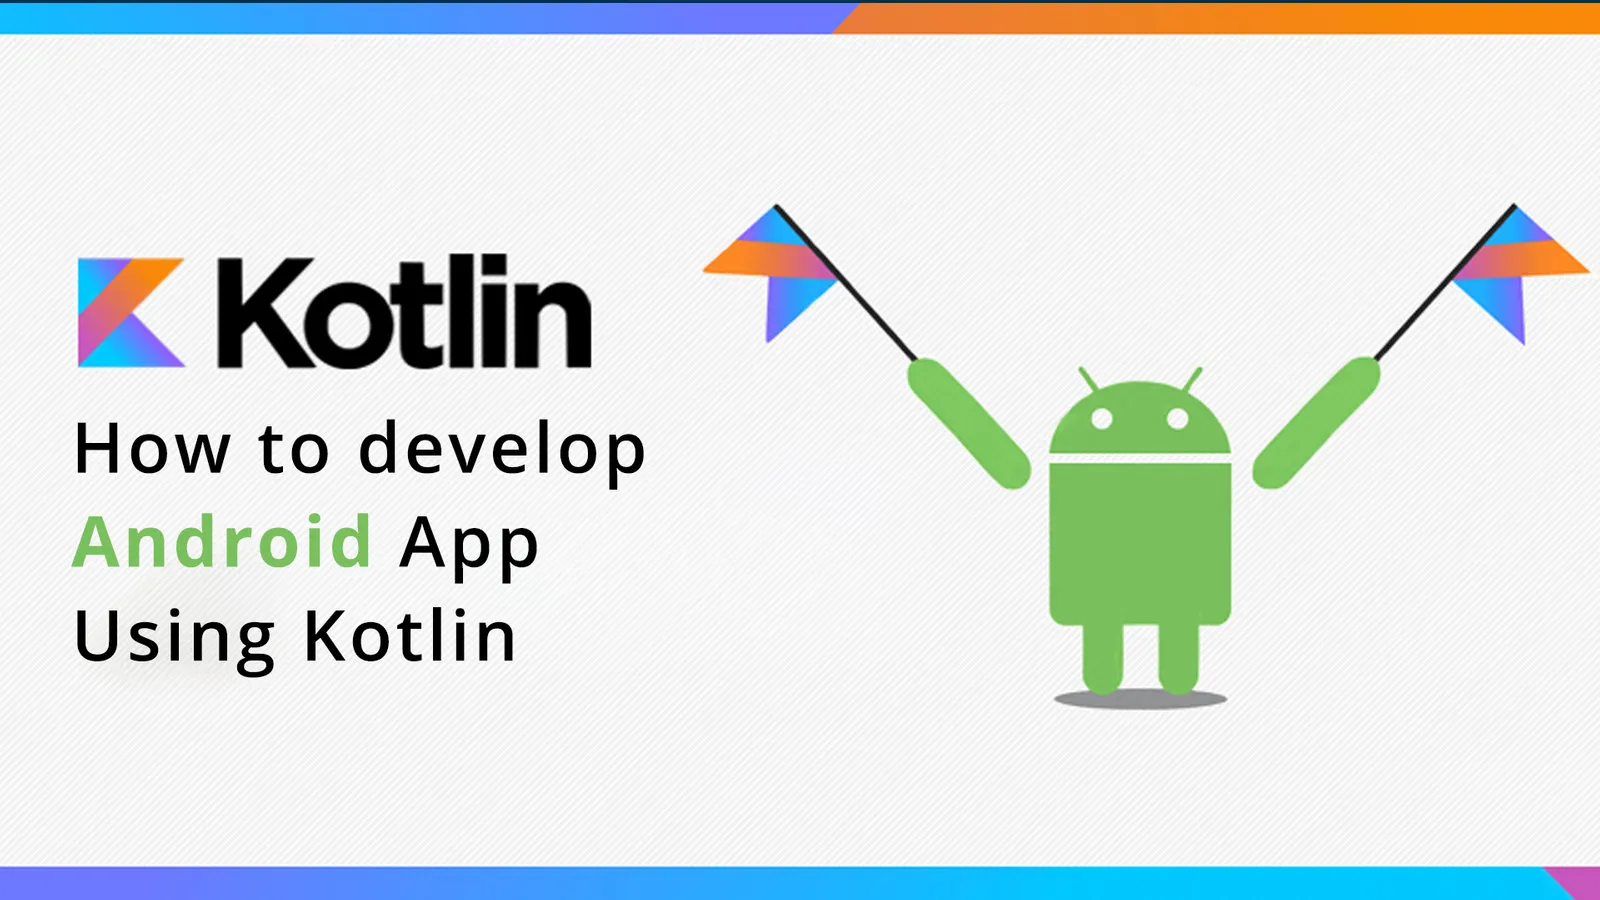 How to Develop an Android App with Kotlin?